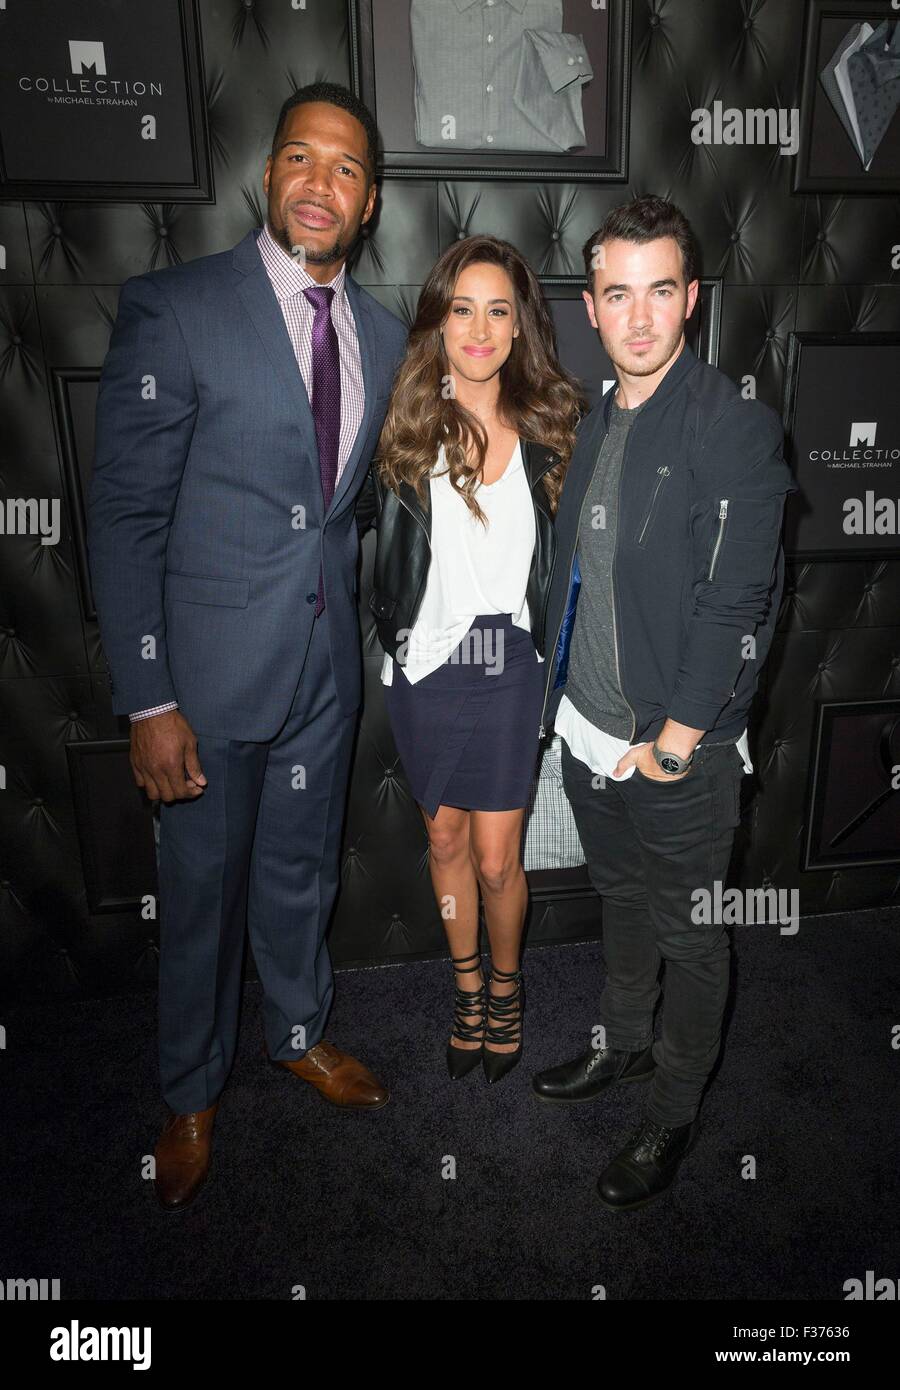 New York Ny Usa 30th Sep 2015 Michael Strahan Guest Kevin Jonas At Arrivals For 